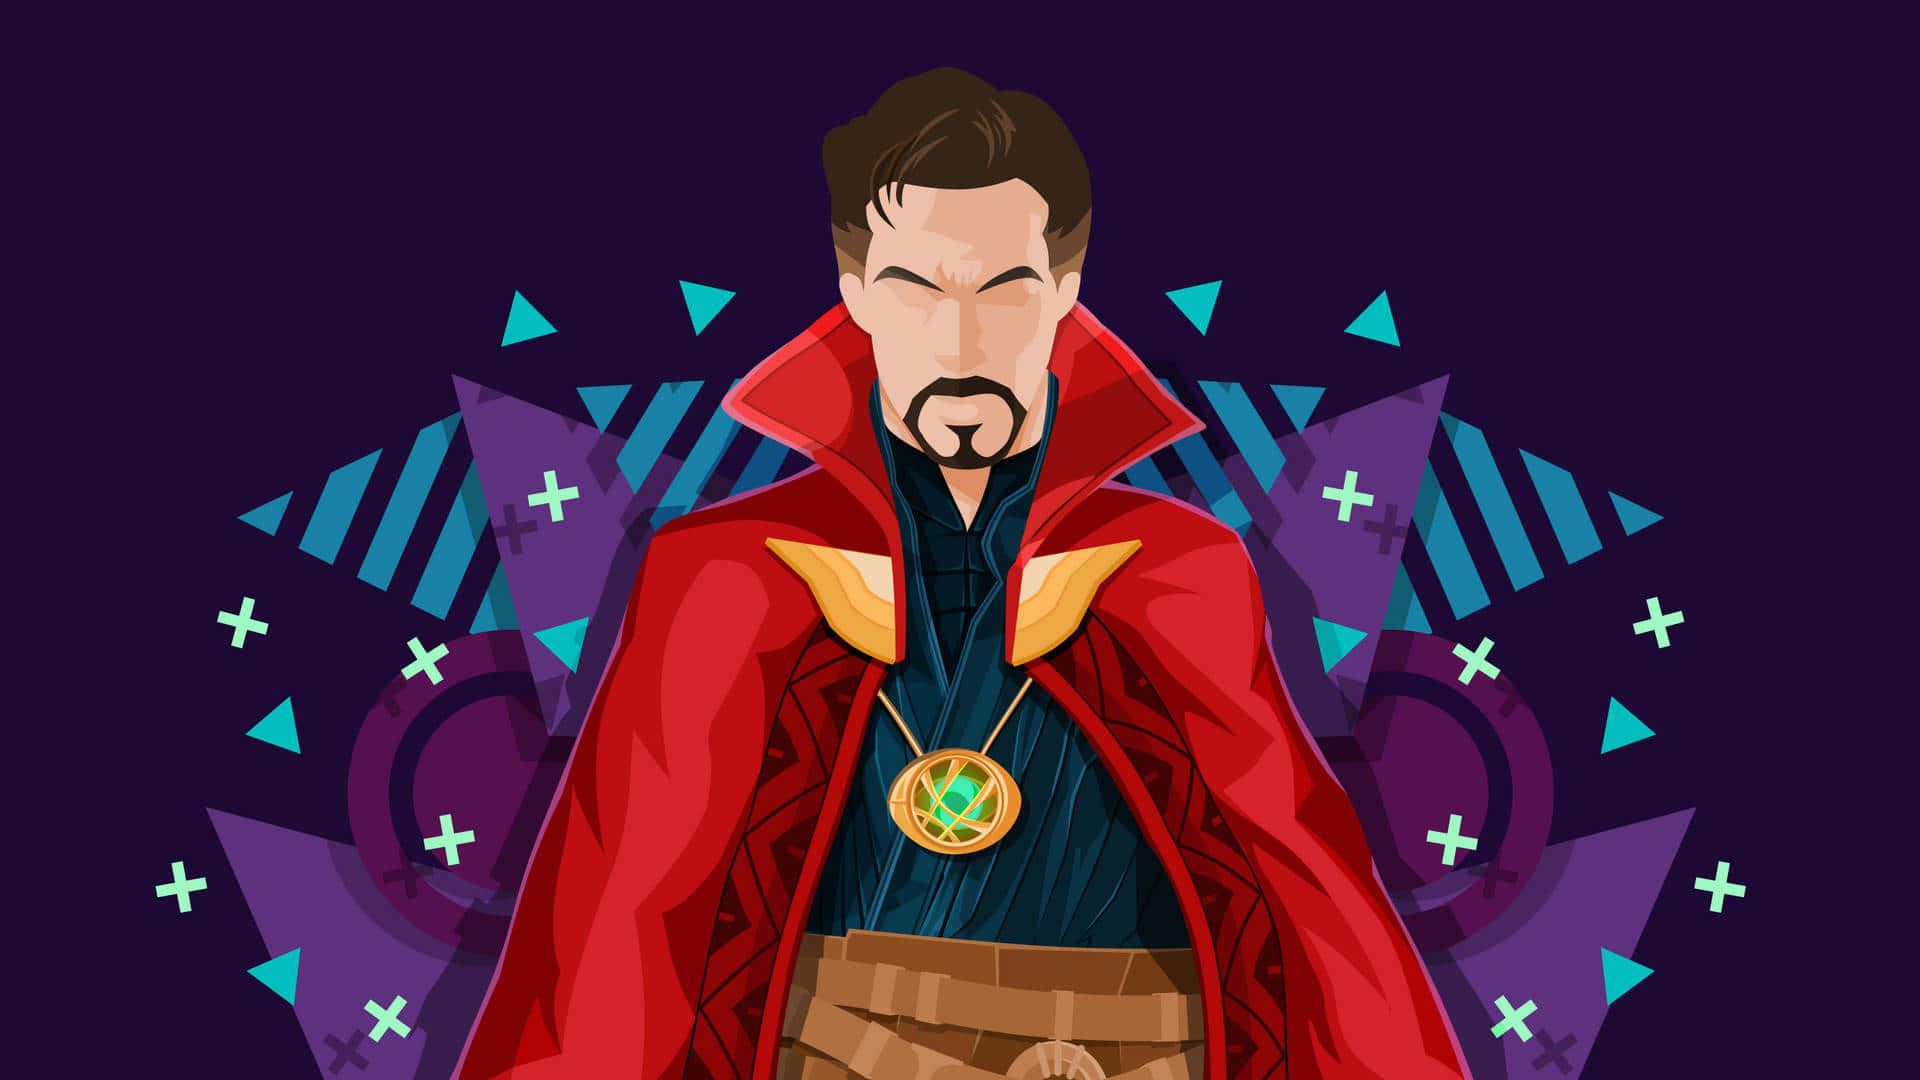 Dr Stephen Strange takes a momentary pause from his superhero antics.